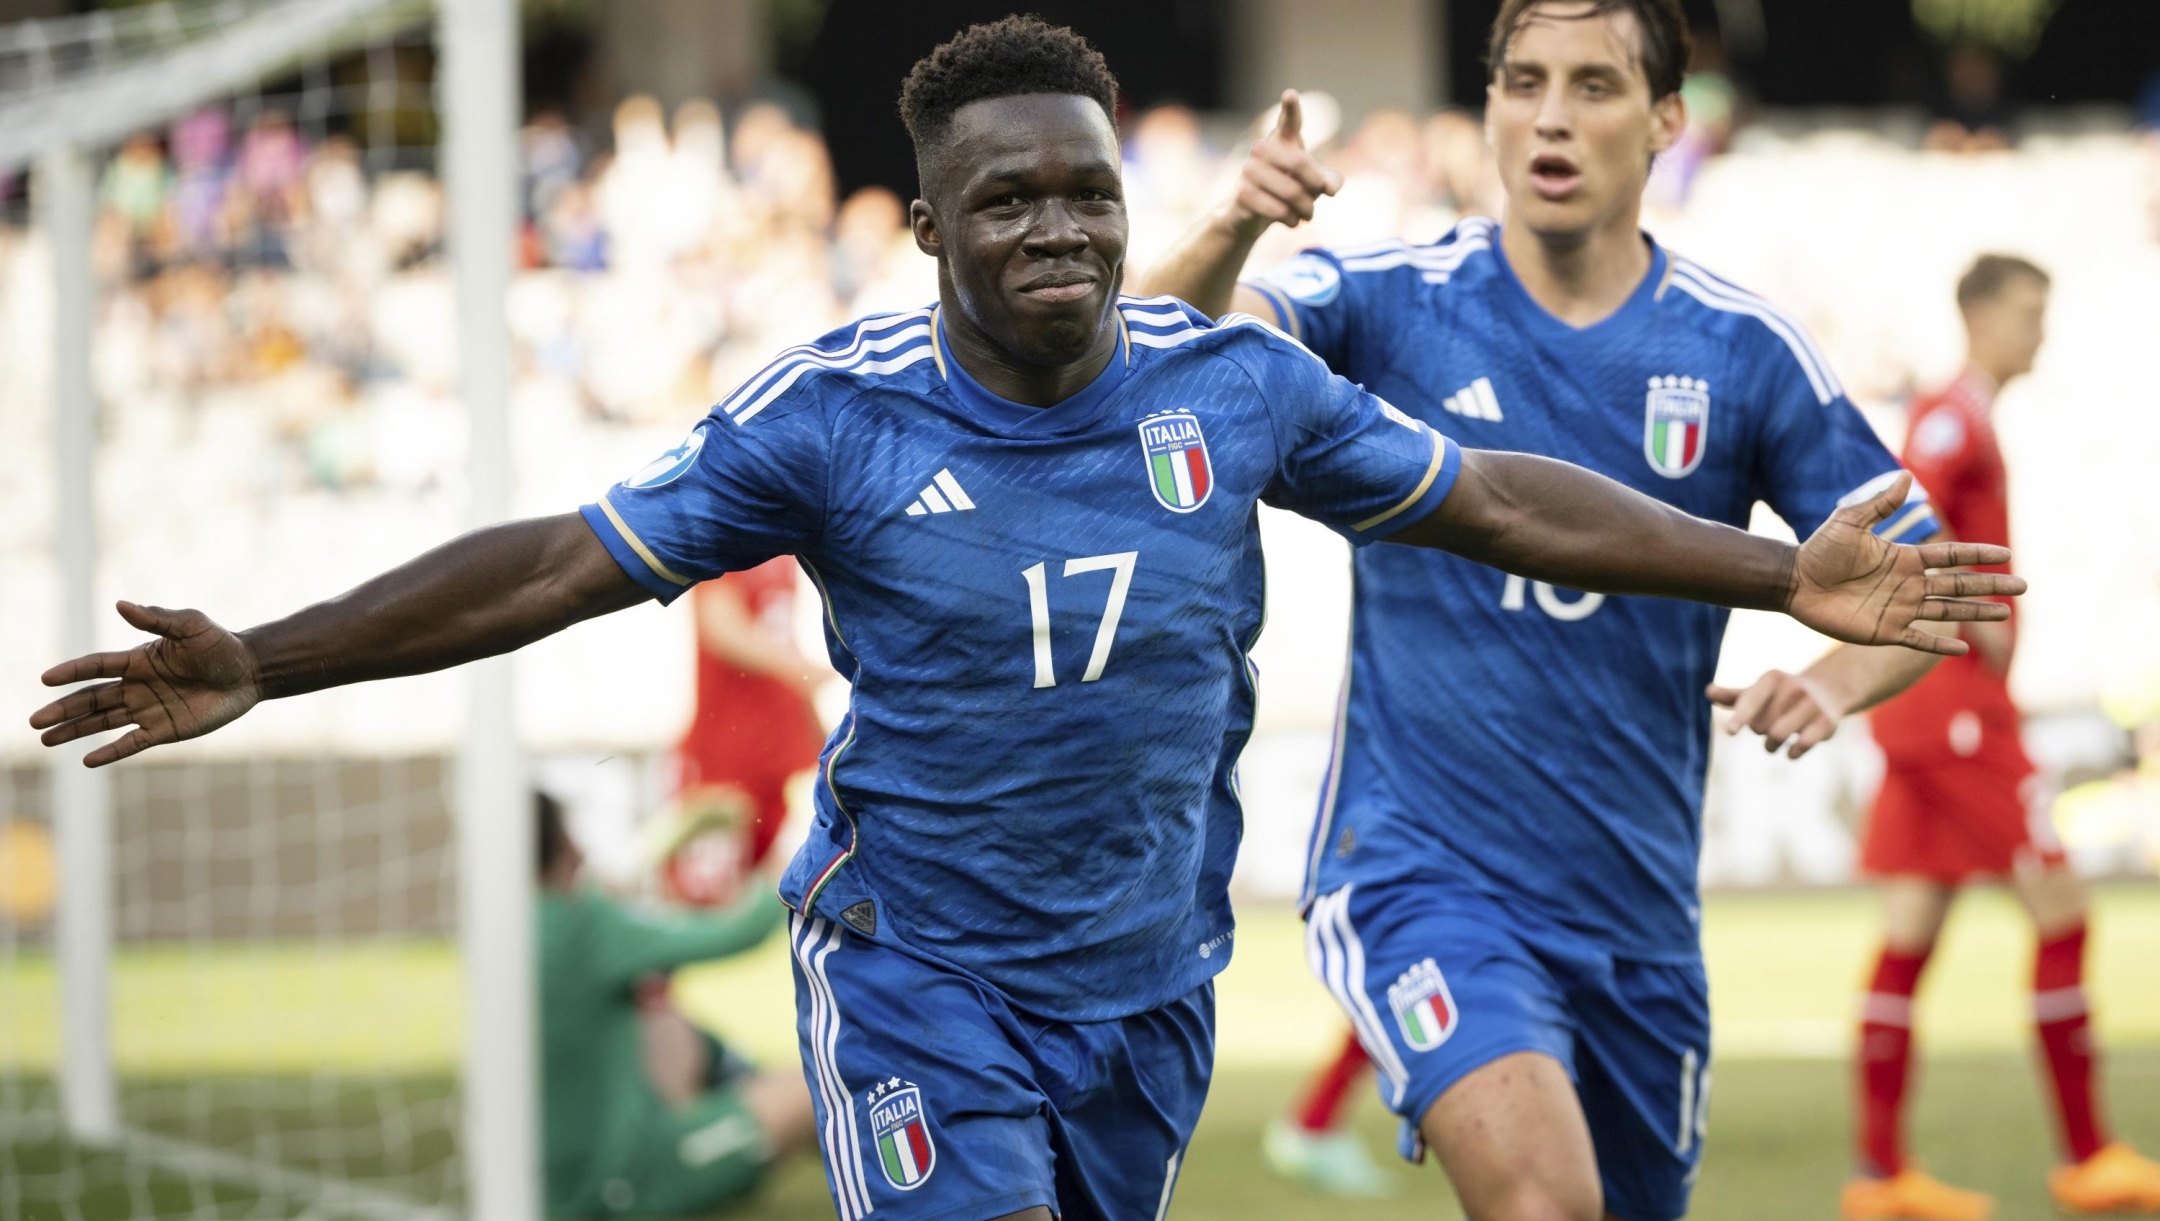 Italy's Wilfried Gnonto, celebrates scoring his side's second goal during the Under 21 European Championships soccer match between Switzerland and Italy at the European Under-21 Championship tournament in the Cluj Arena in Cluj-Napoca, Romania, Sunday June 25, 2023. (Georgios Kefalas/Keystone via AP)